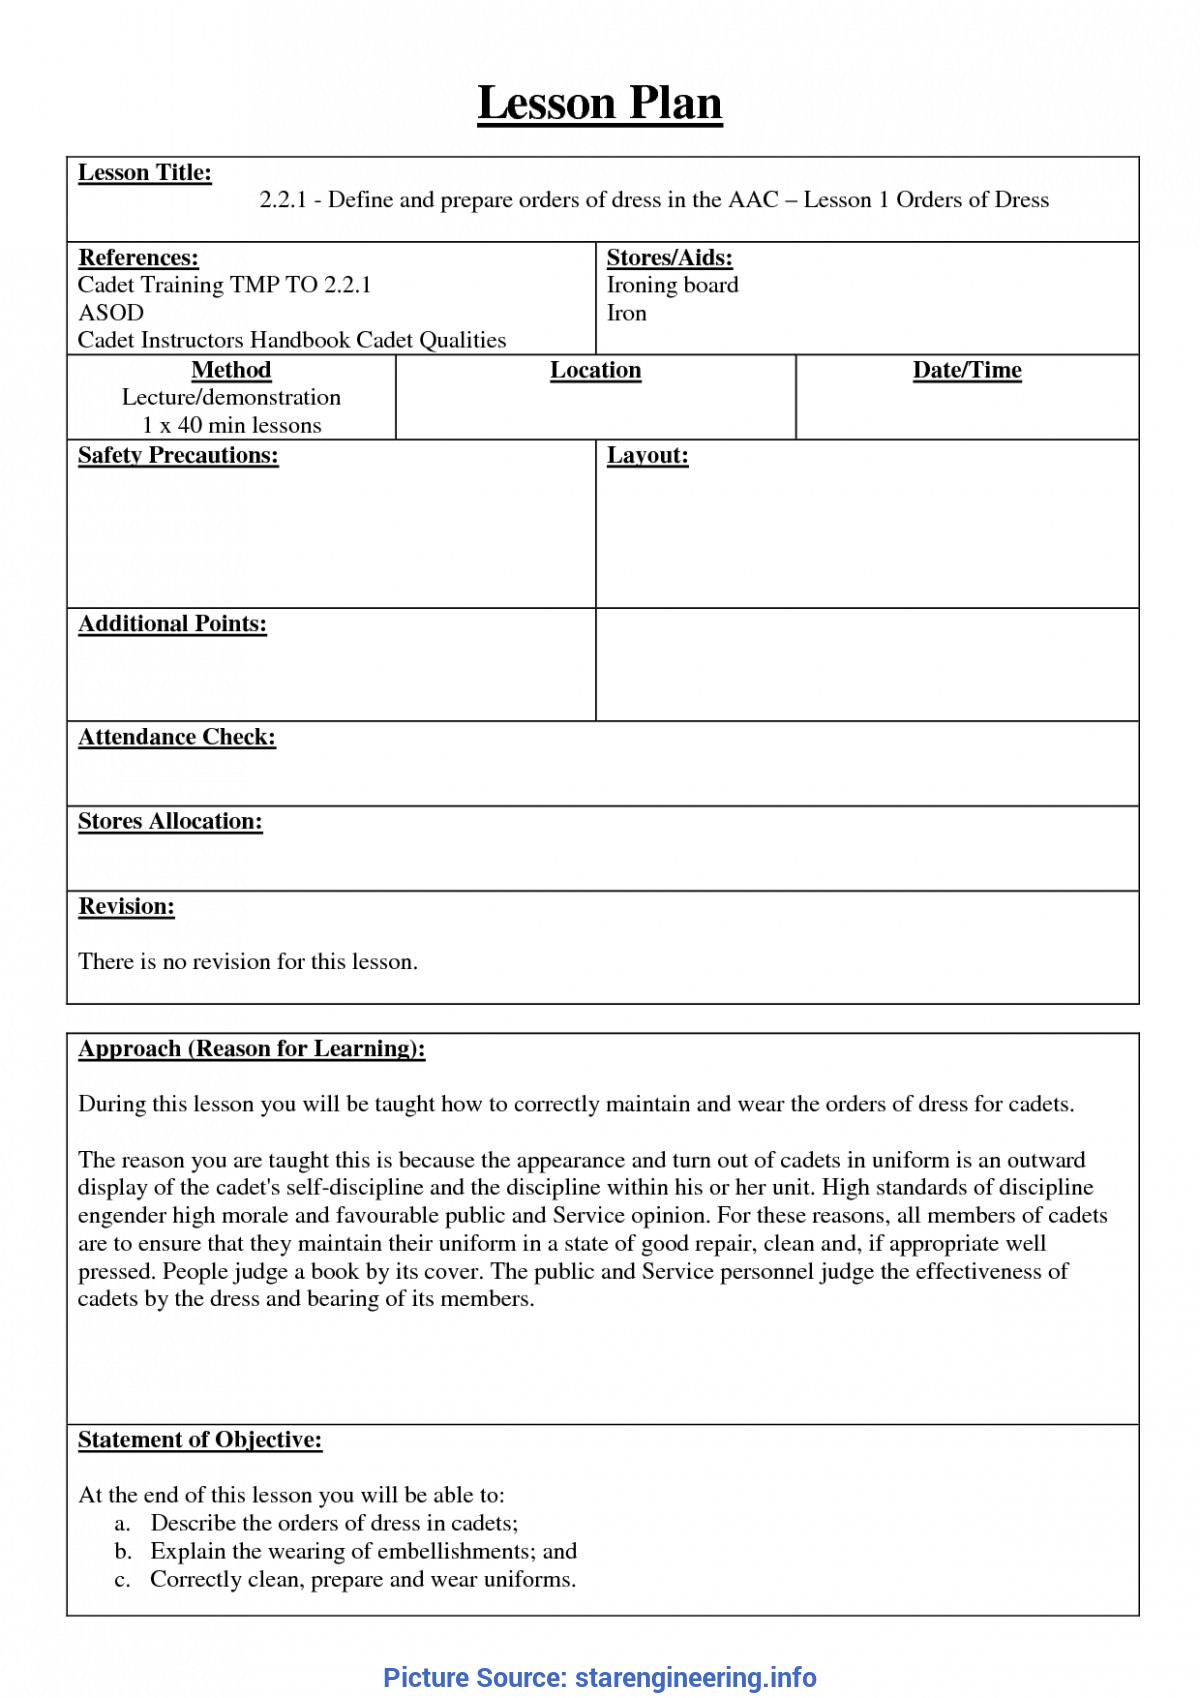 Lesson Plan Outline Lesson Plan Template Nsw Ten Fantastic Vacation Ideas for